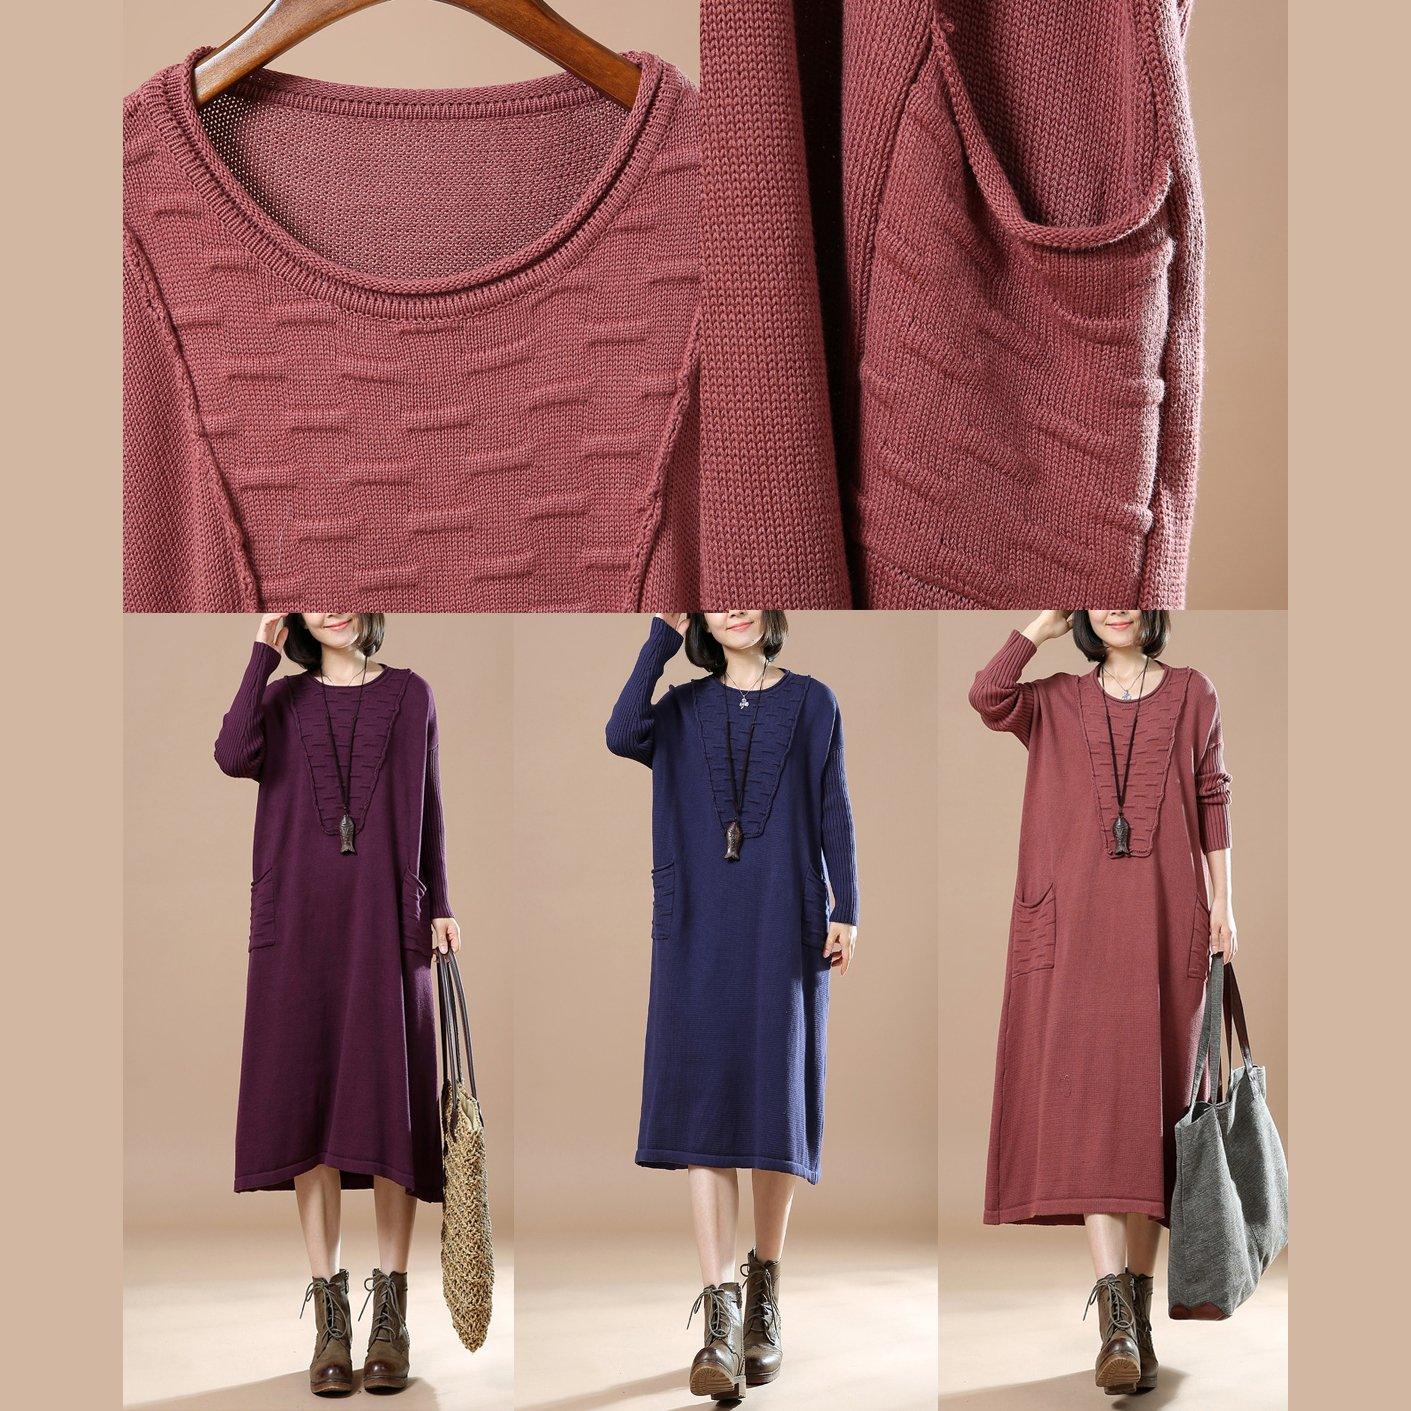 Mulberry knit maxi dresses plus size women sweaters caftans - Omychic